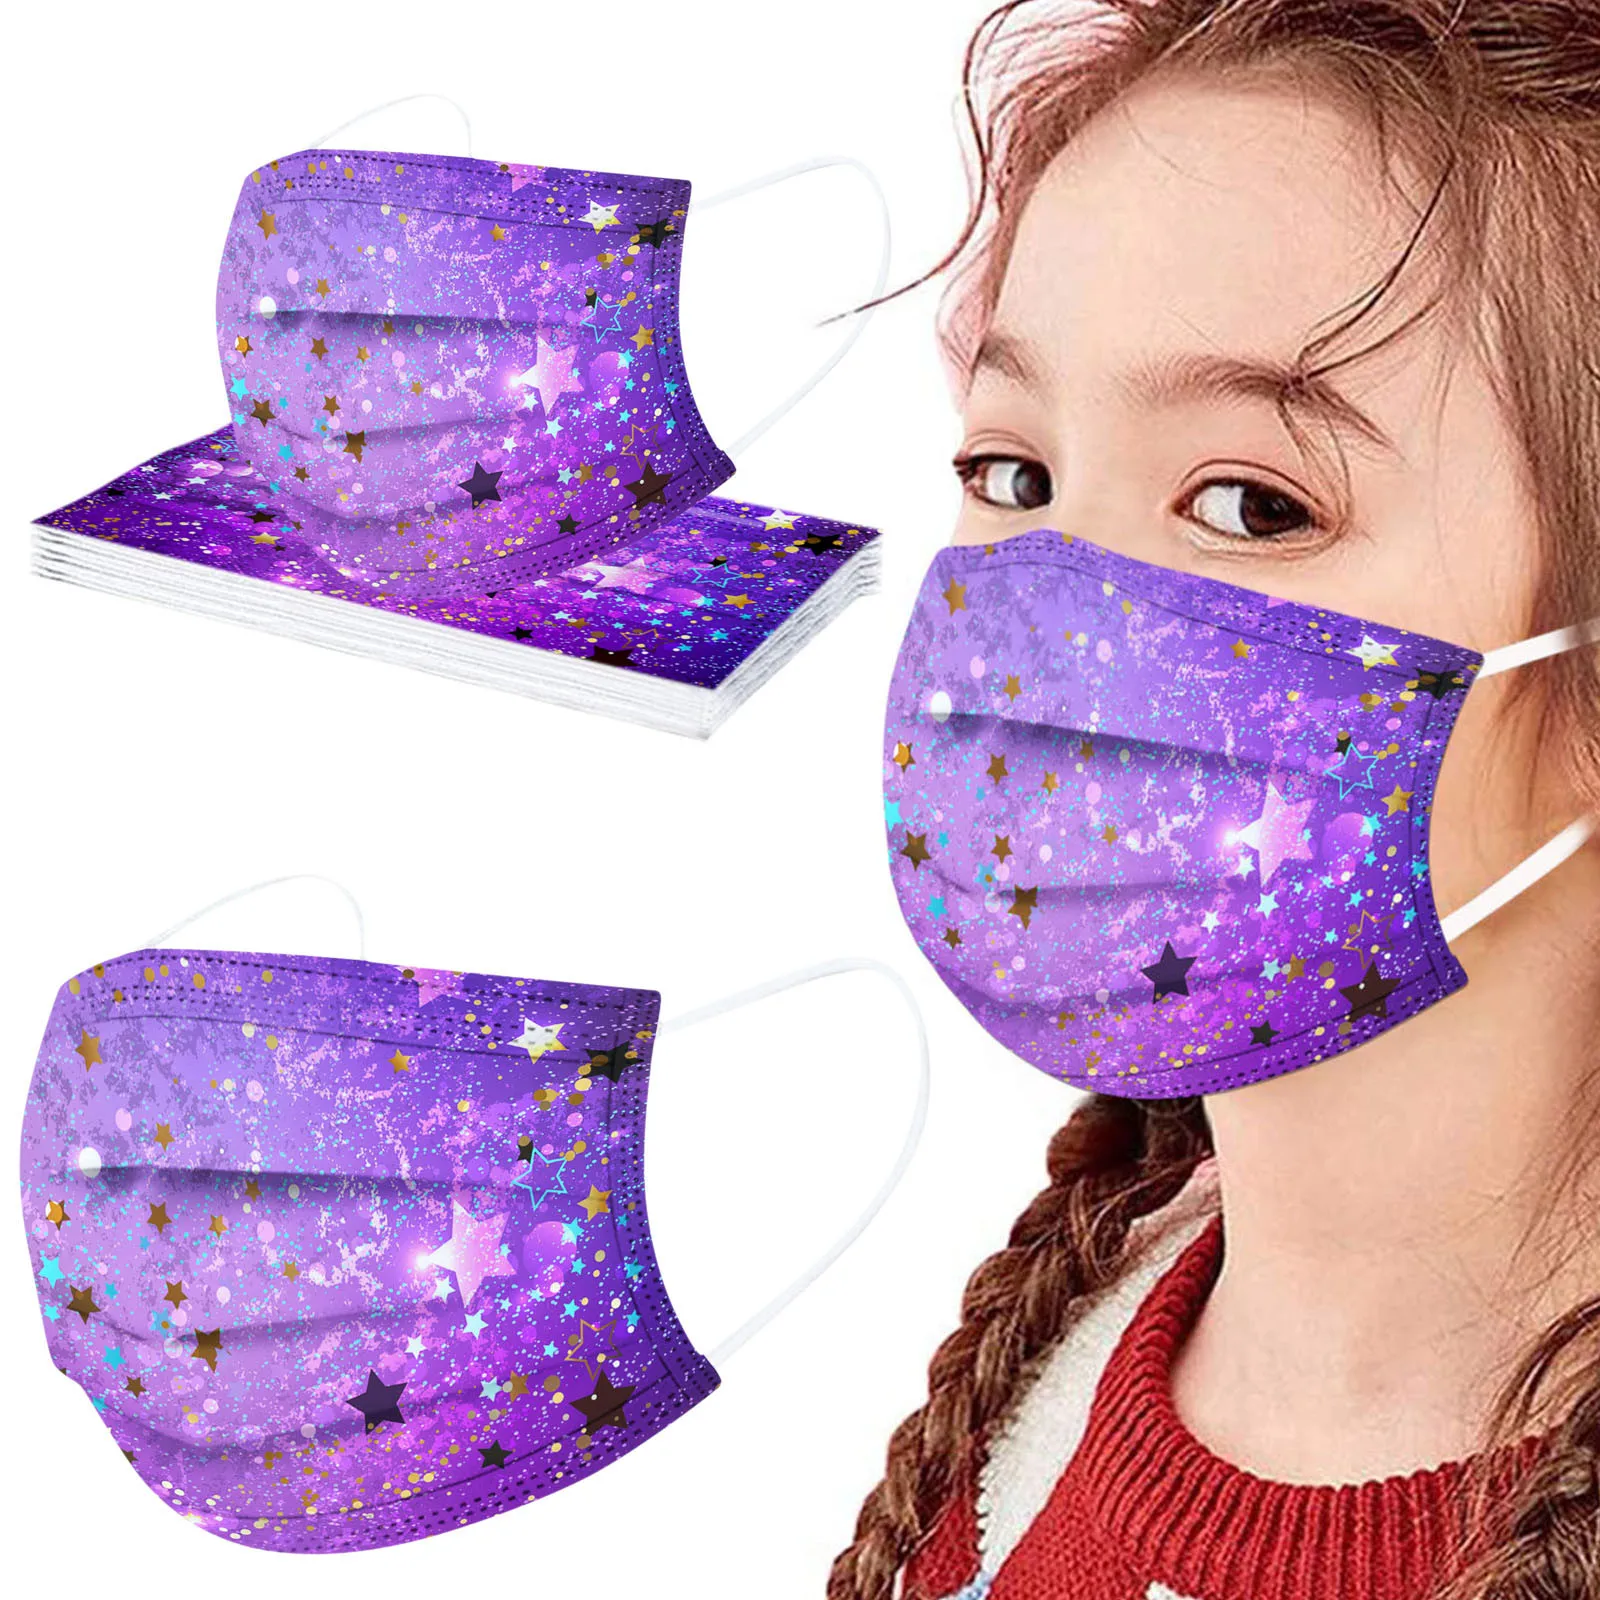 

50PC Child Star printing Disposable Face Masks Industrial Protec 3ply Mask Dustproof Filter Pm2.5 Mask Earloop Bandage Masque